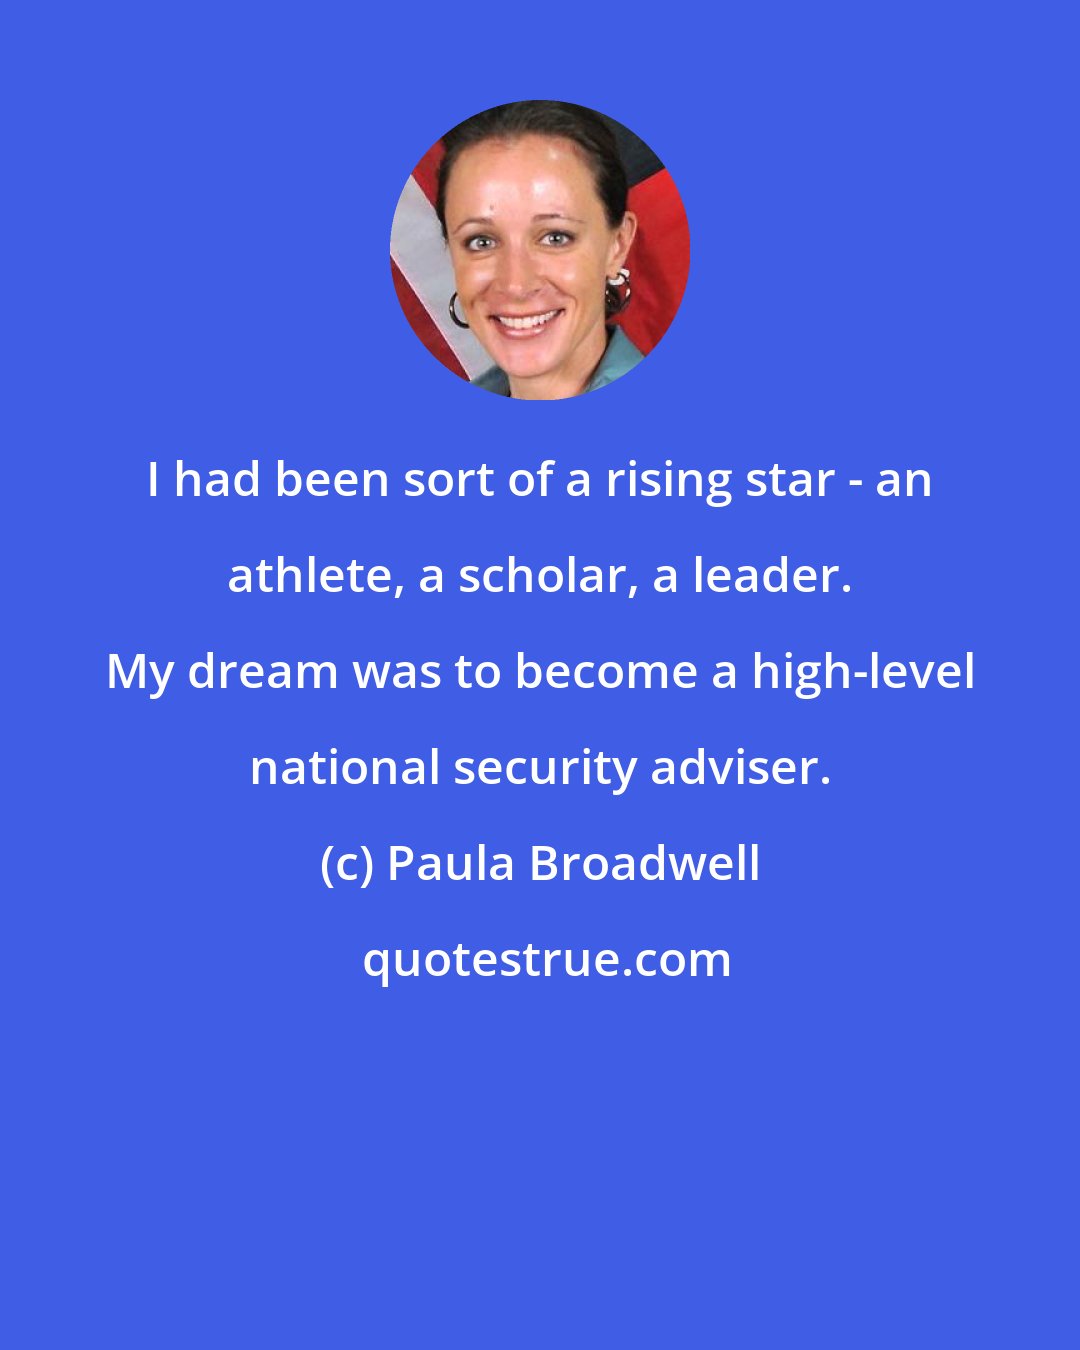 Paula Broadwell: I had been sort of a rising star - an athlete, a scholar, a leader. My dream was to become a high-level national security adviser.